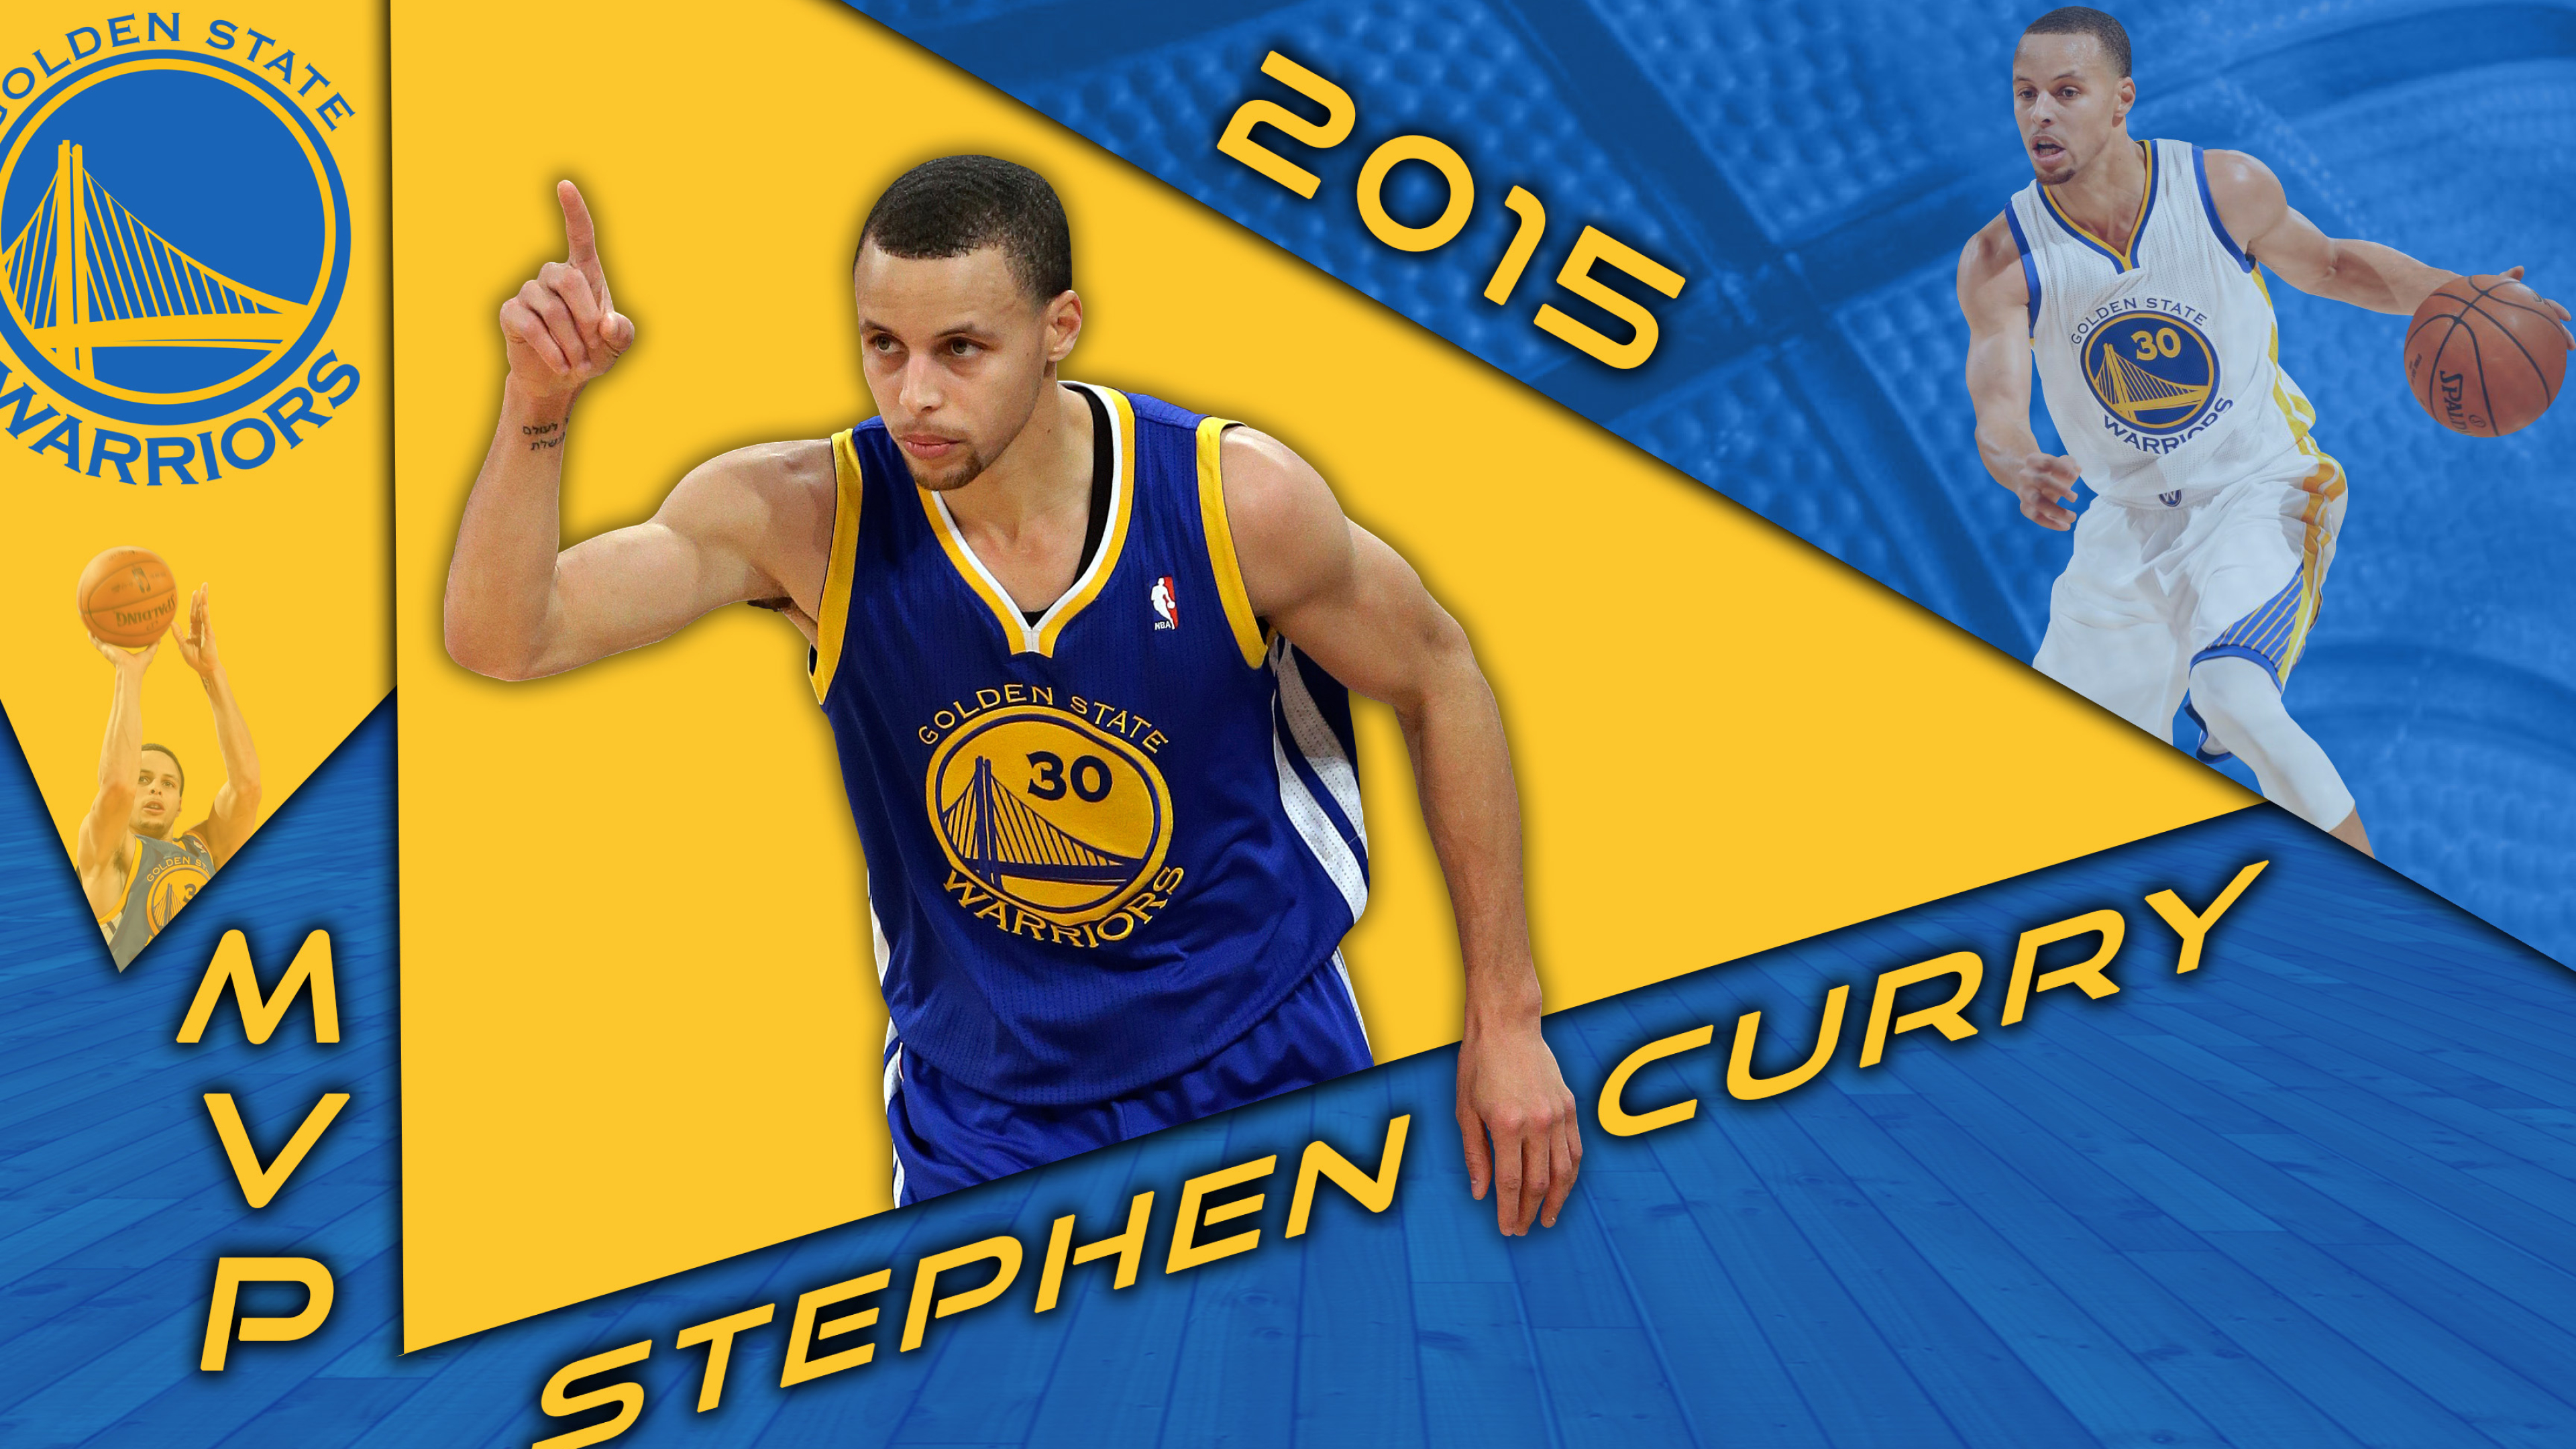 Golden State Warriors: Stephen Curry, The team was founded in 1946 in Philadelphia. 3840x2160 4K Background.